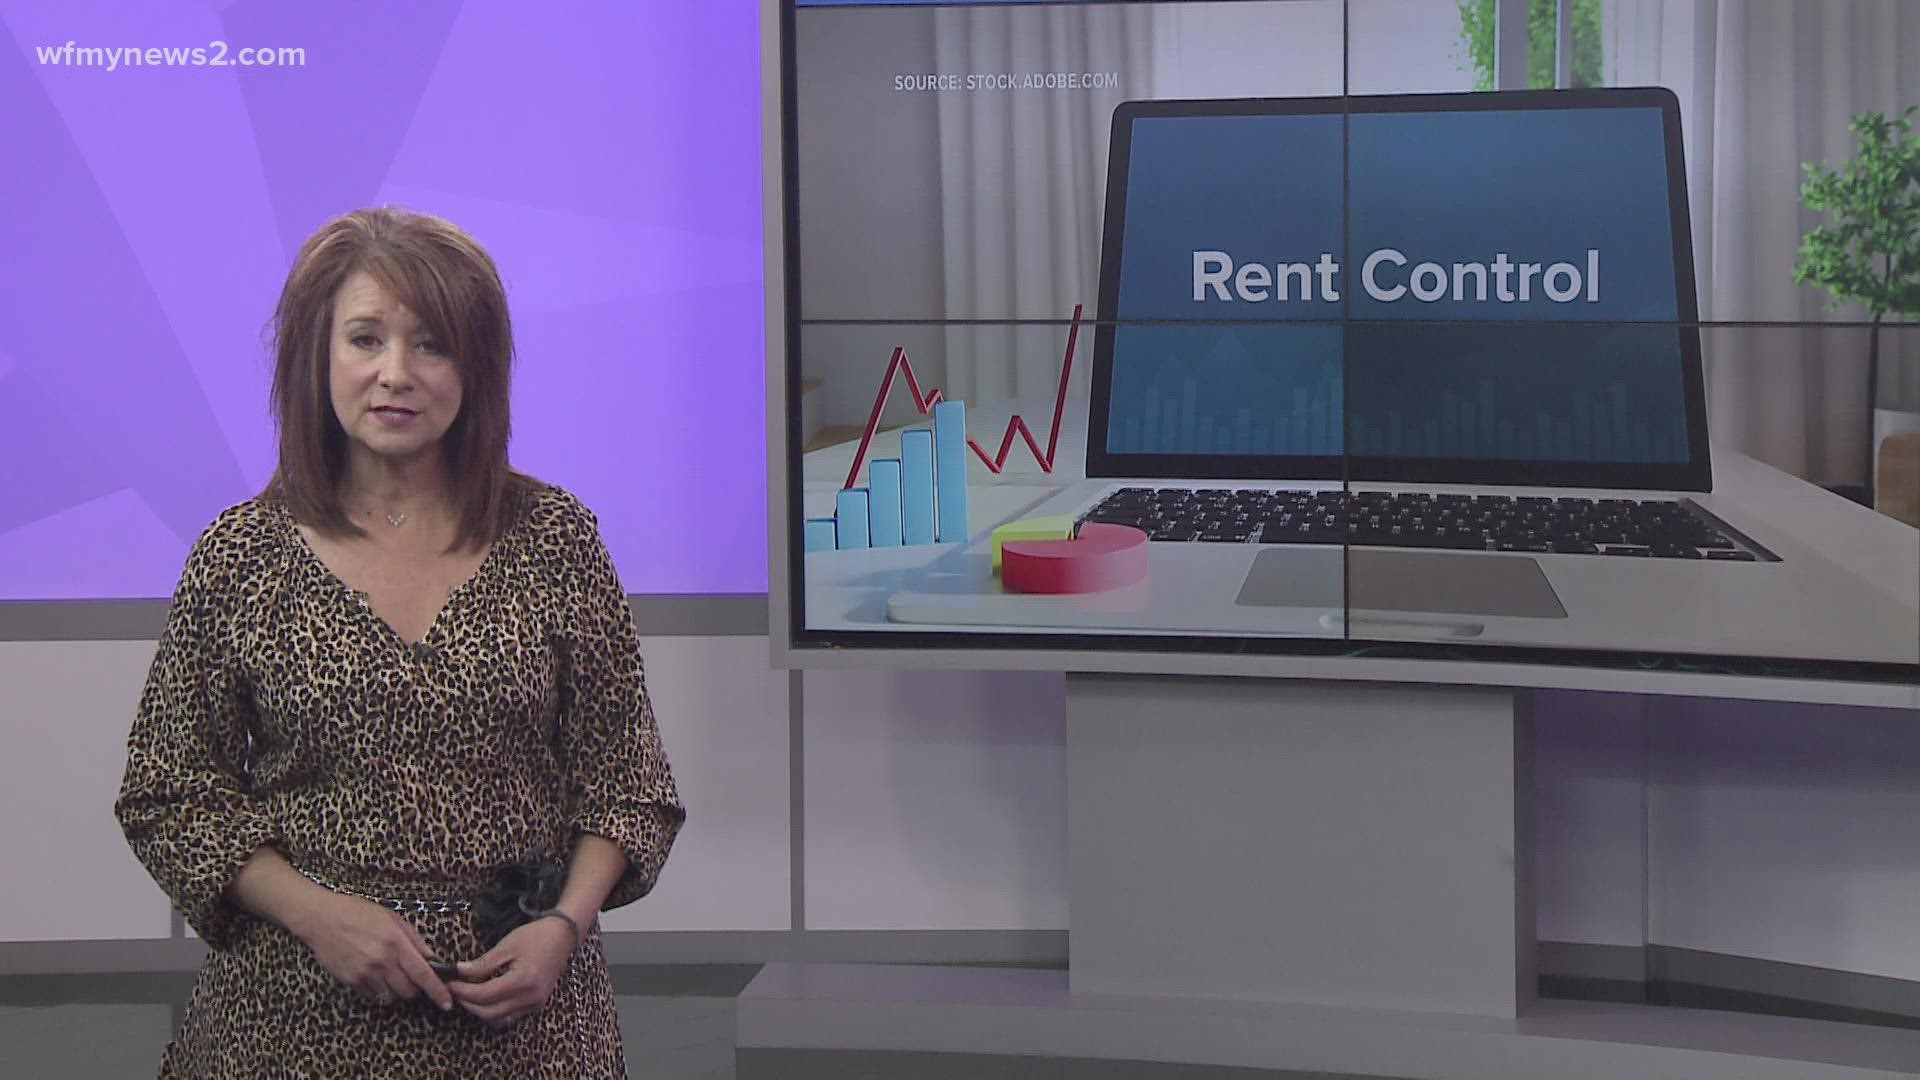 Rent rates are going up across the country and it's perfectly legal for landlords to do it.